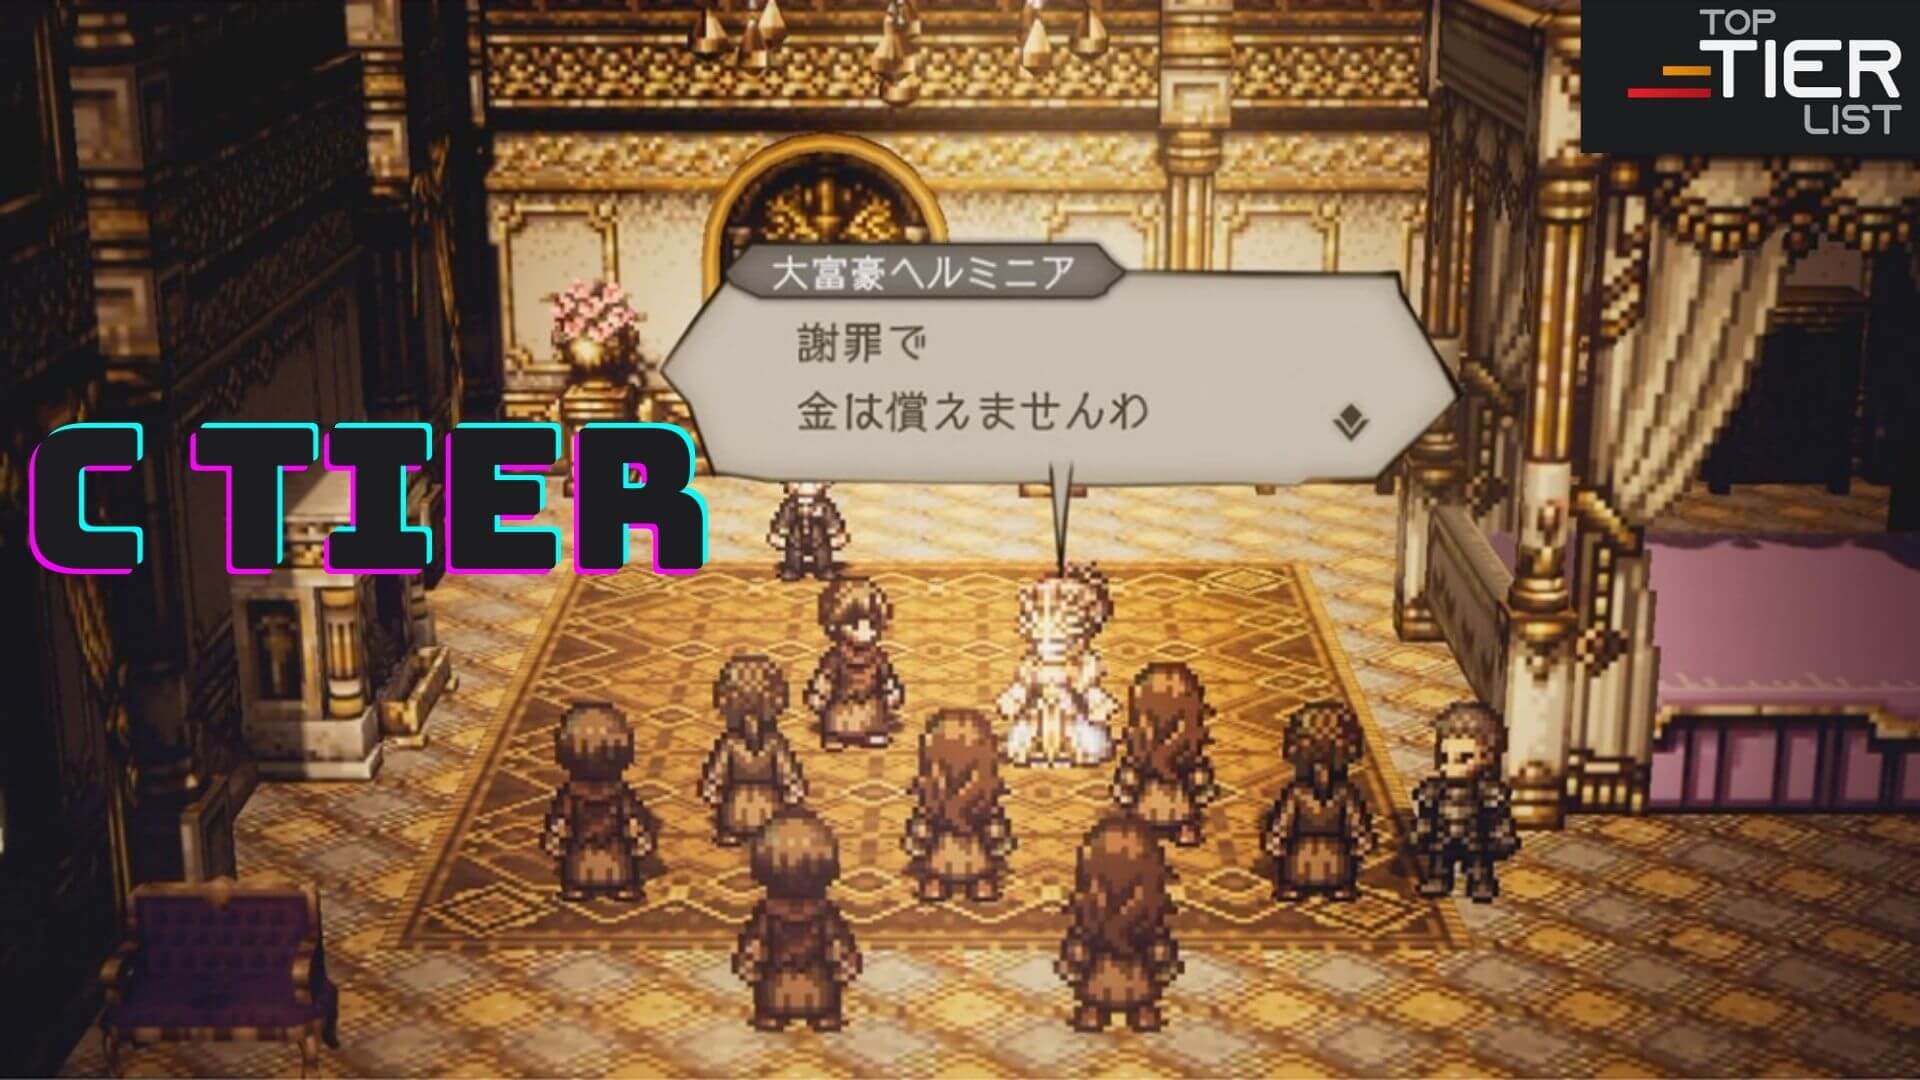 Octopath traveler champions of the Continent Tier list 